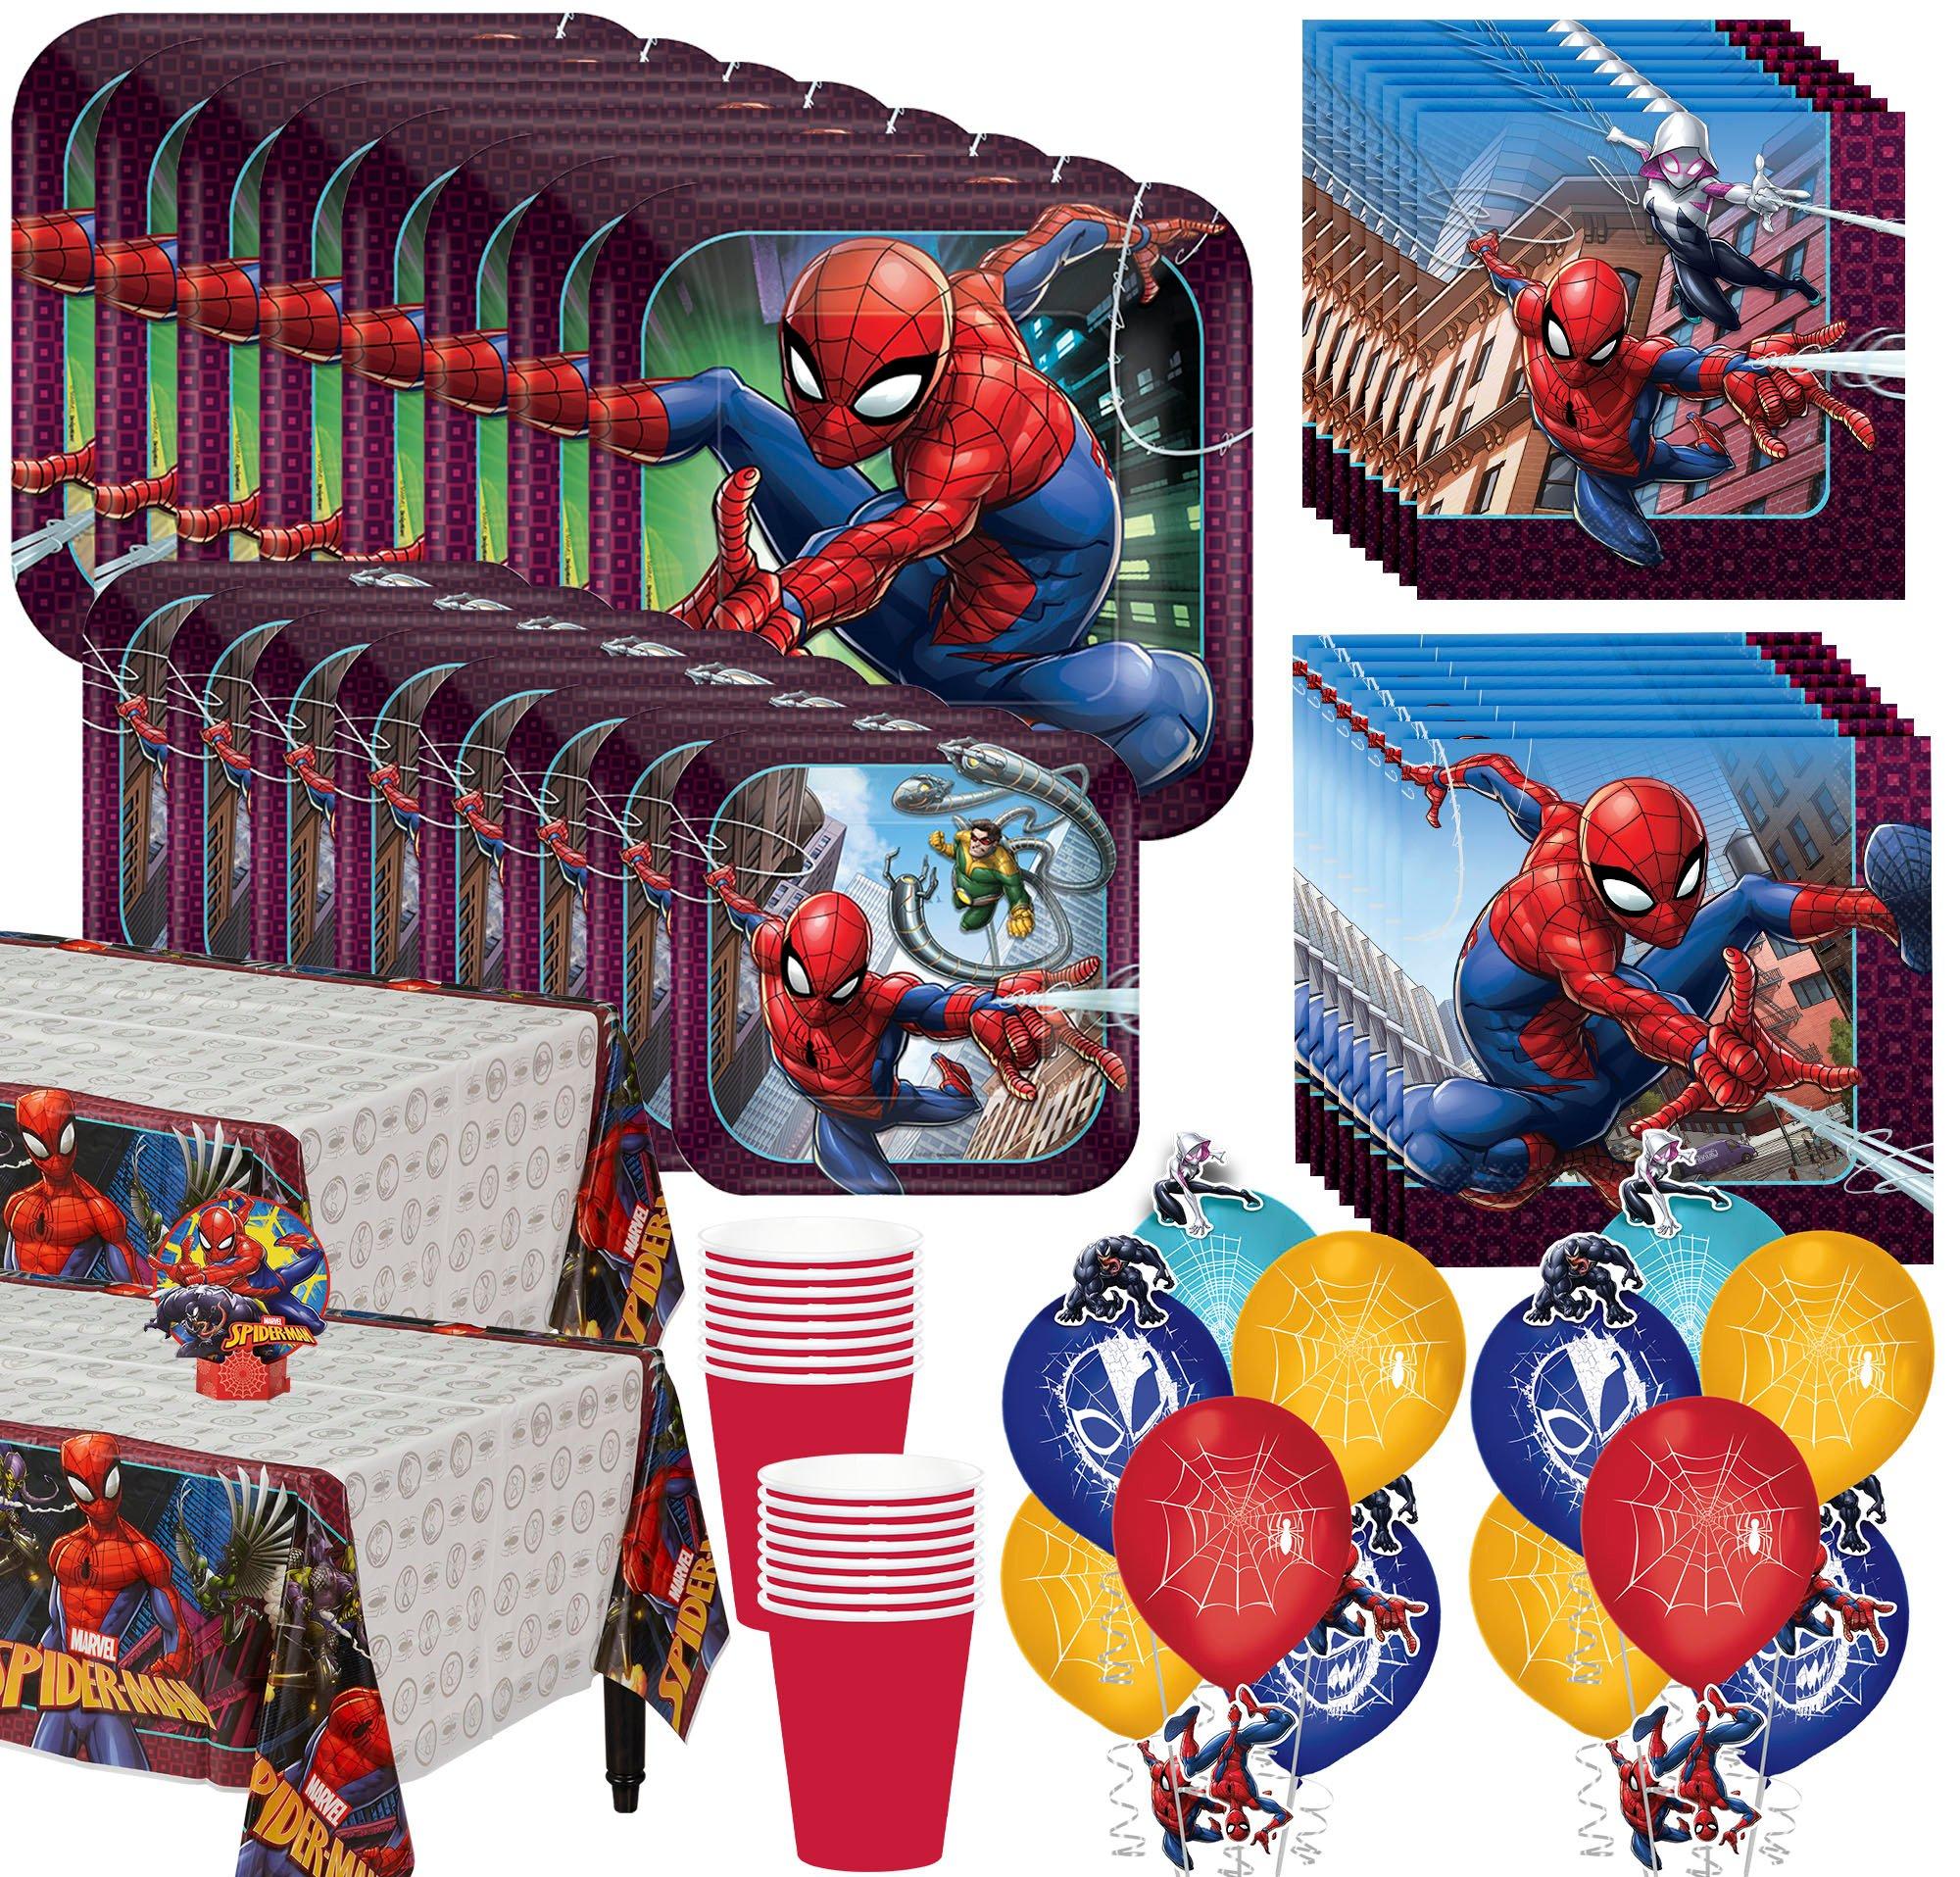 Spiderman Ultimate Party Supplies Pack for 16 Guests - Kit Includes Plates, Napkins, Cups, Table Covers, Centerpiece & Themed Latex Balloons